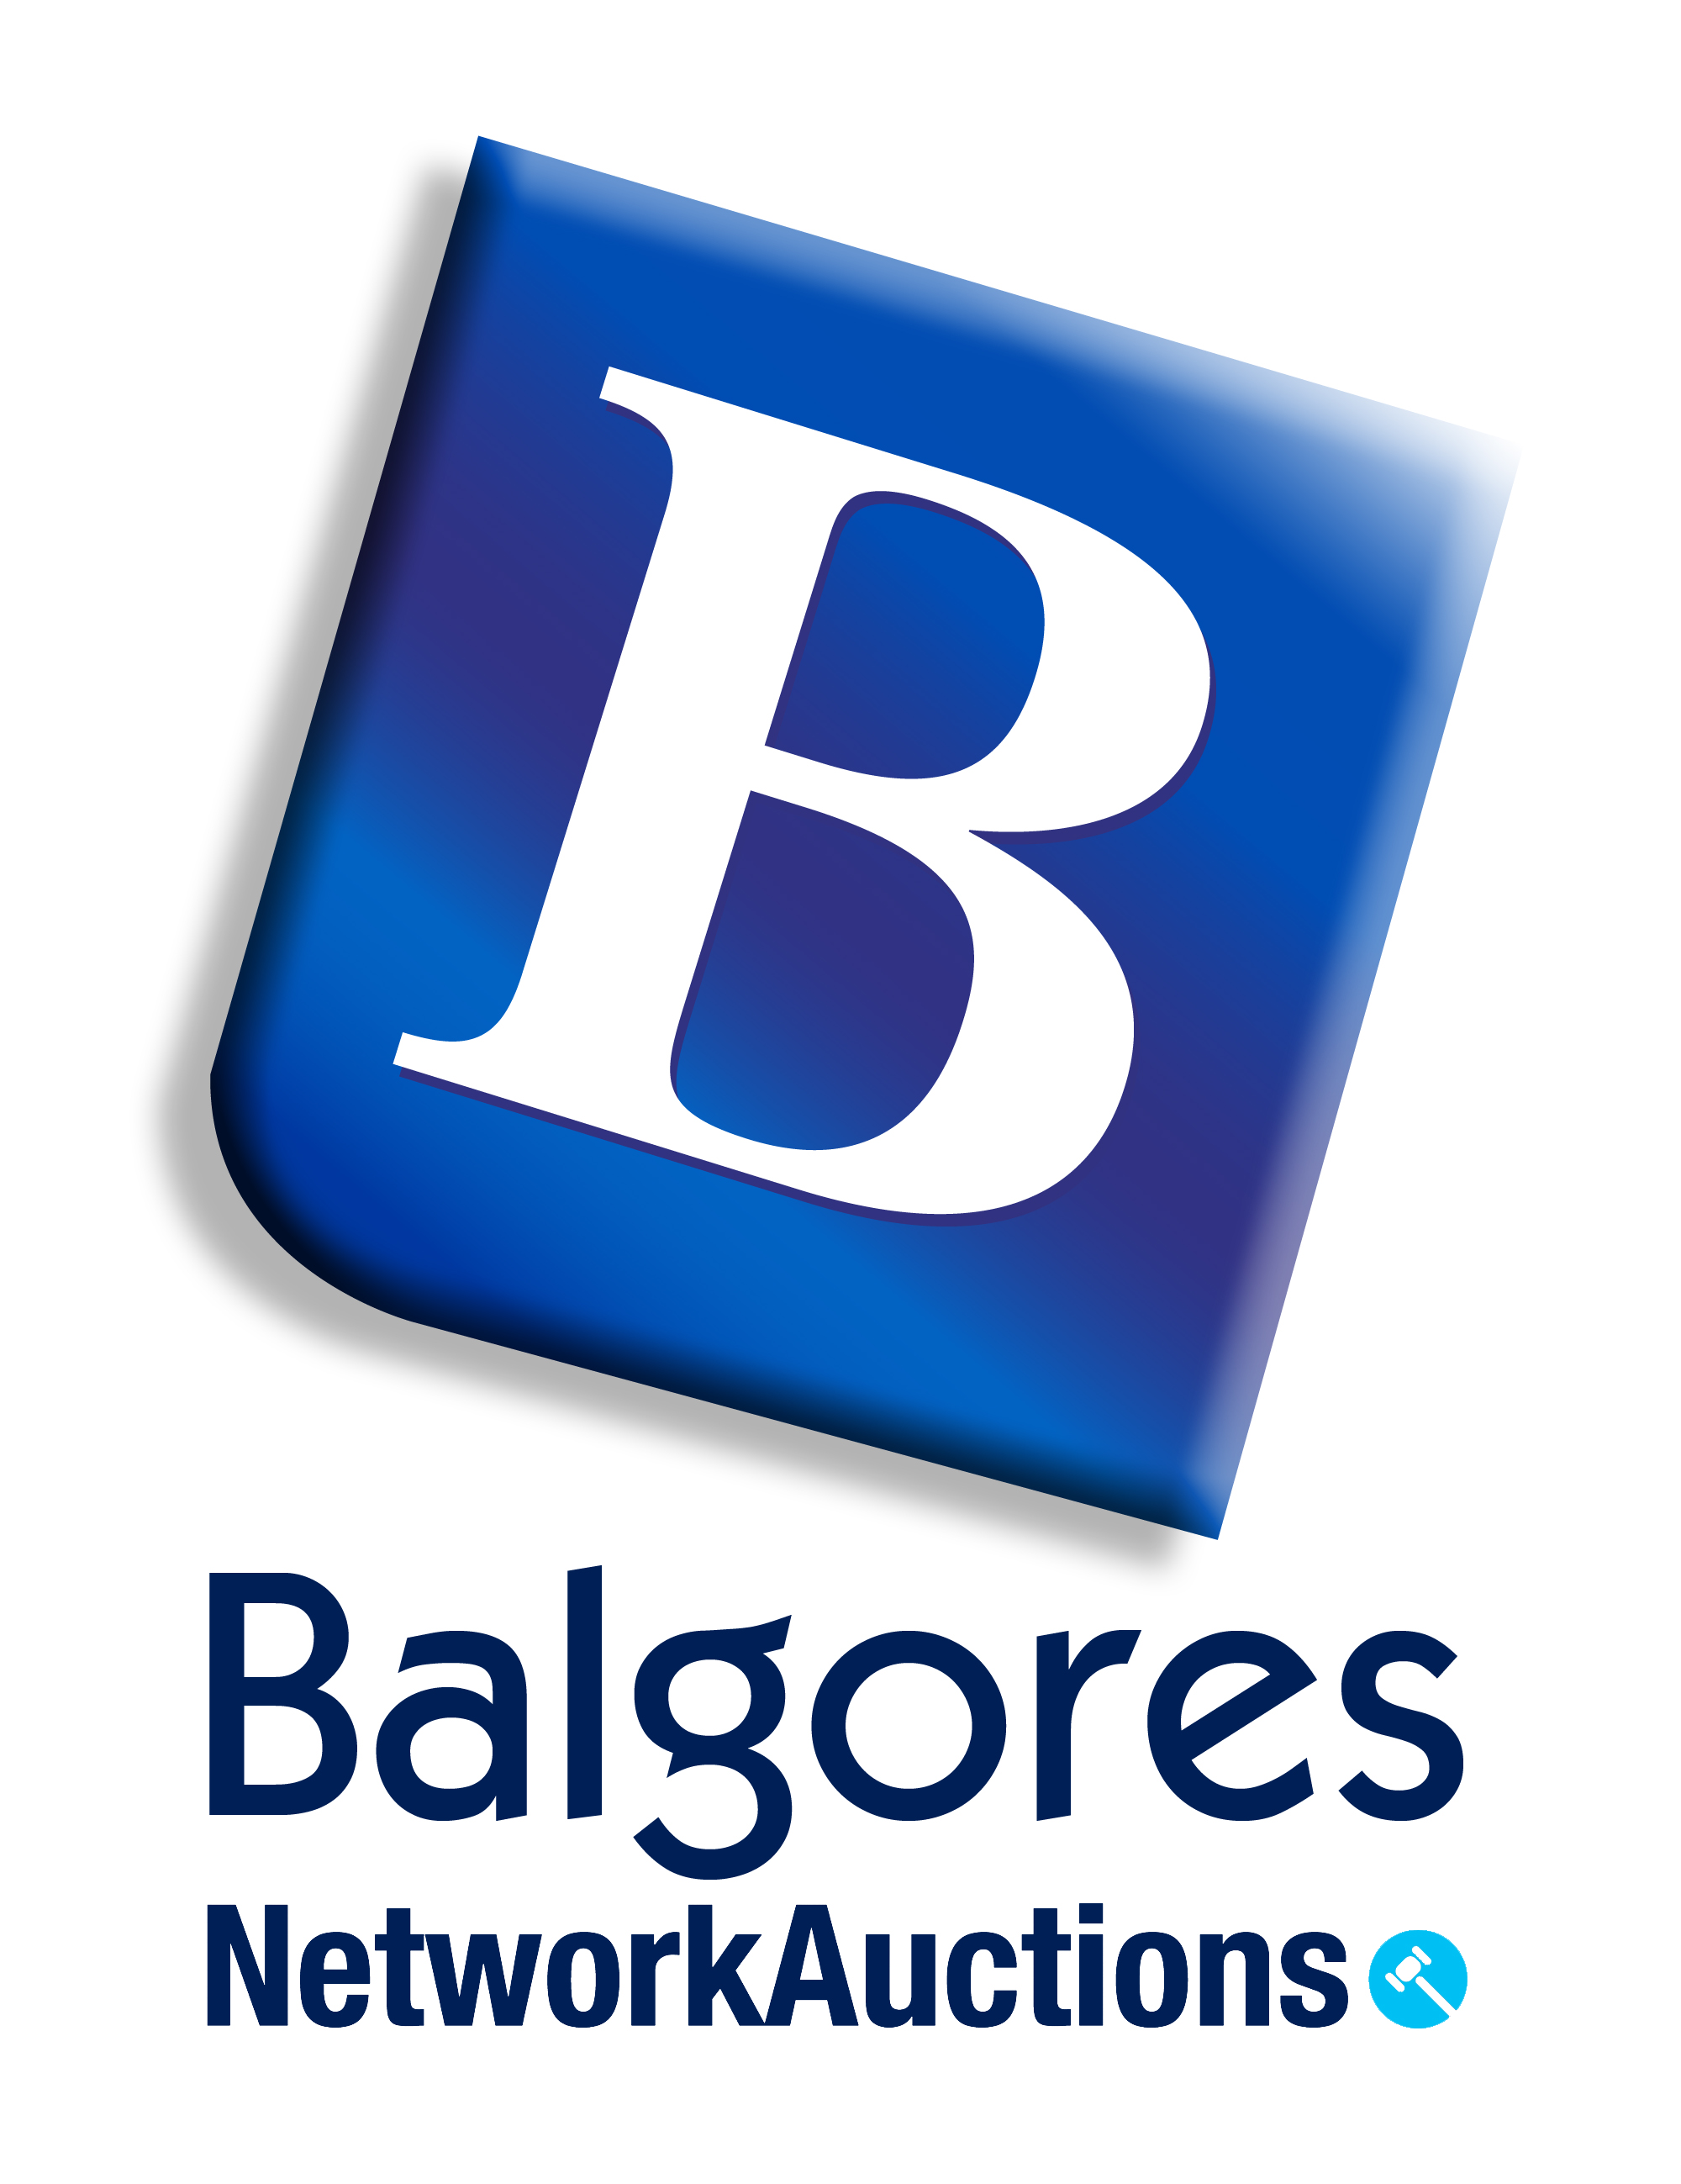 Please contact Balgores Network Auctions on 01277 369925.